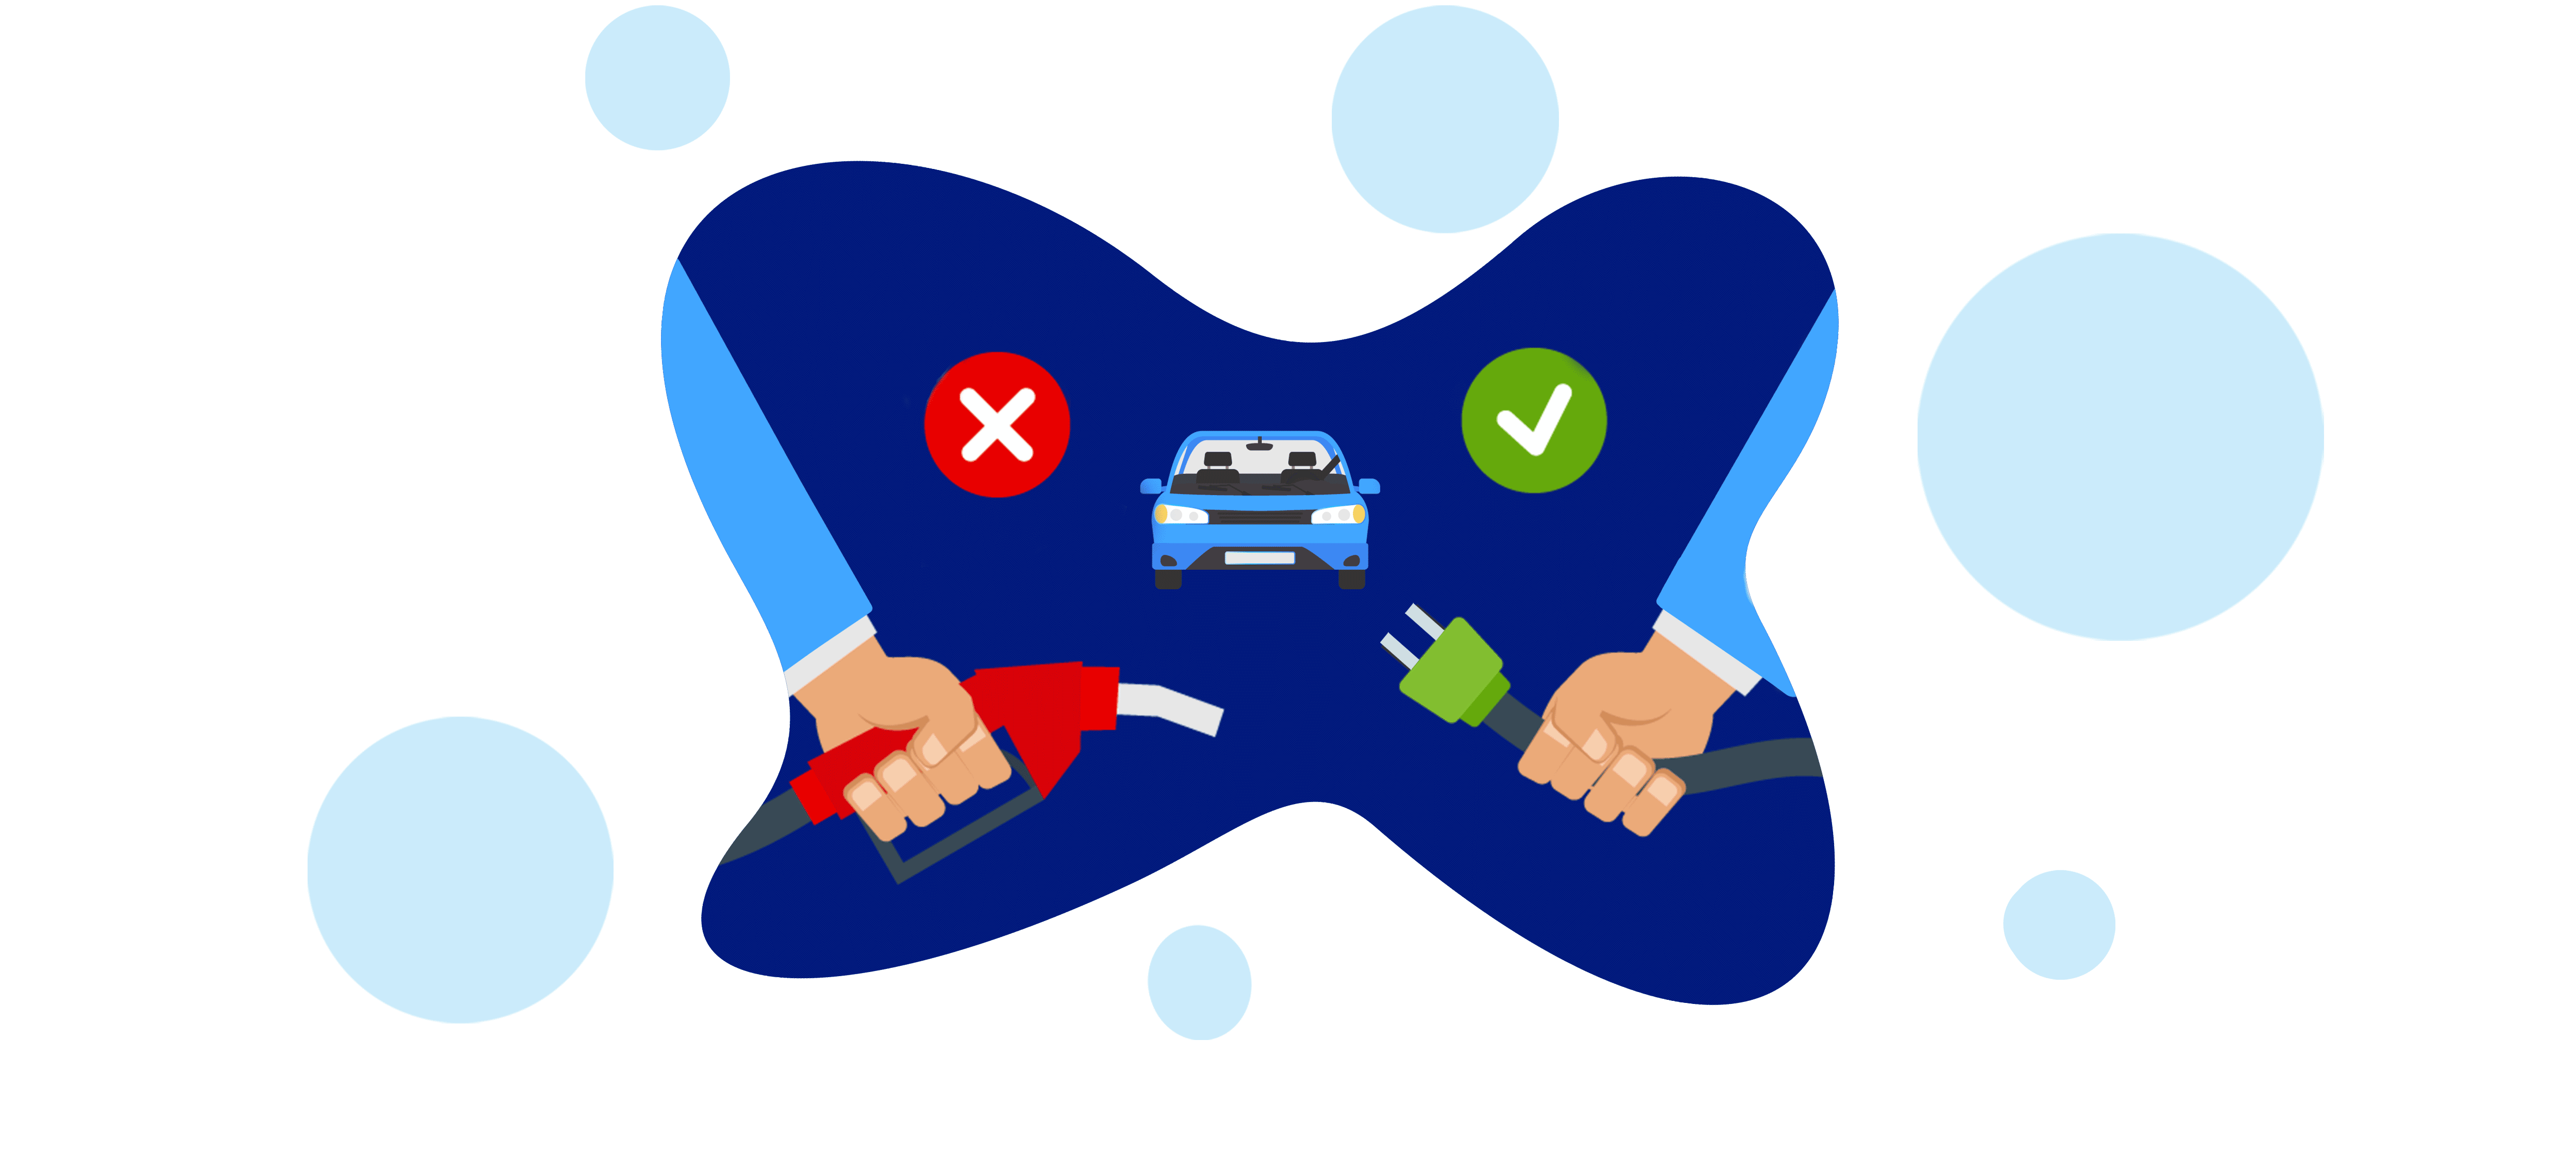 An illustration indicating a verdict of emissions between petrol cars and electric vehicles 